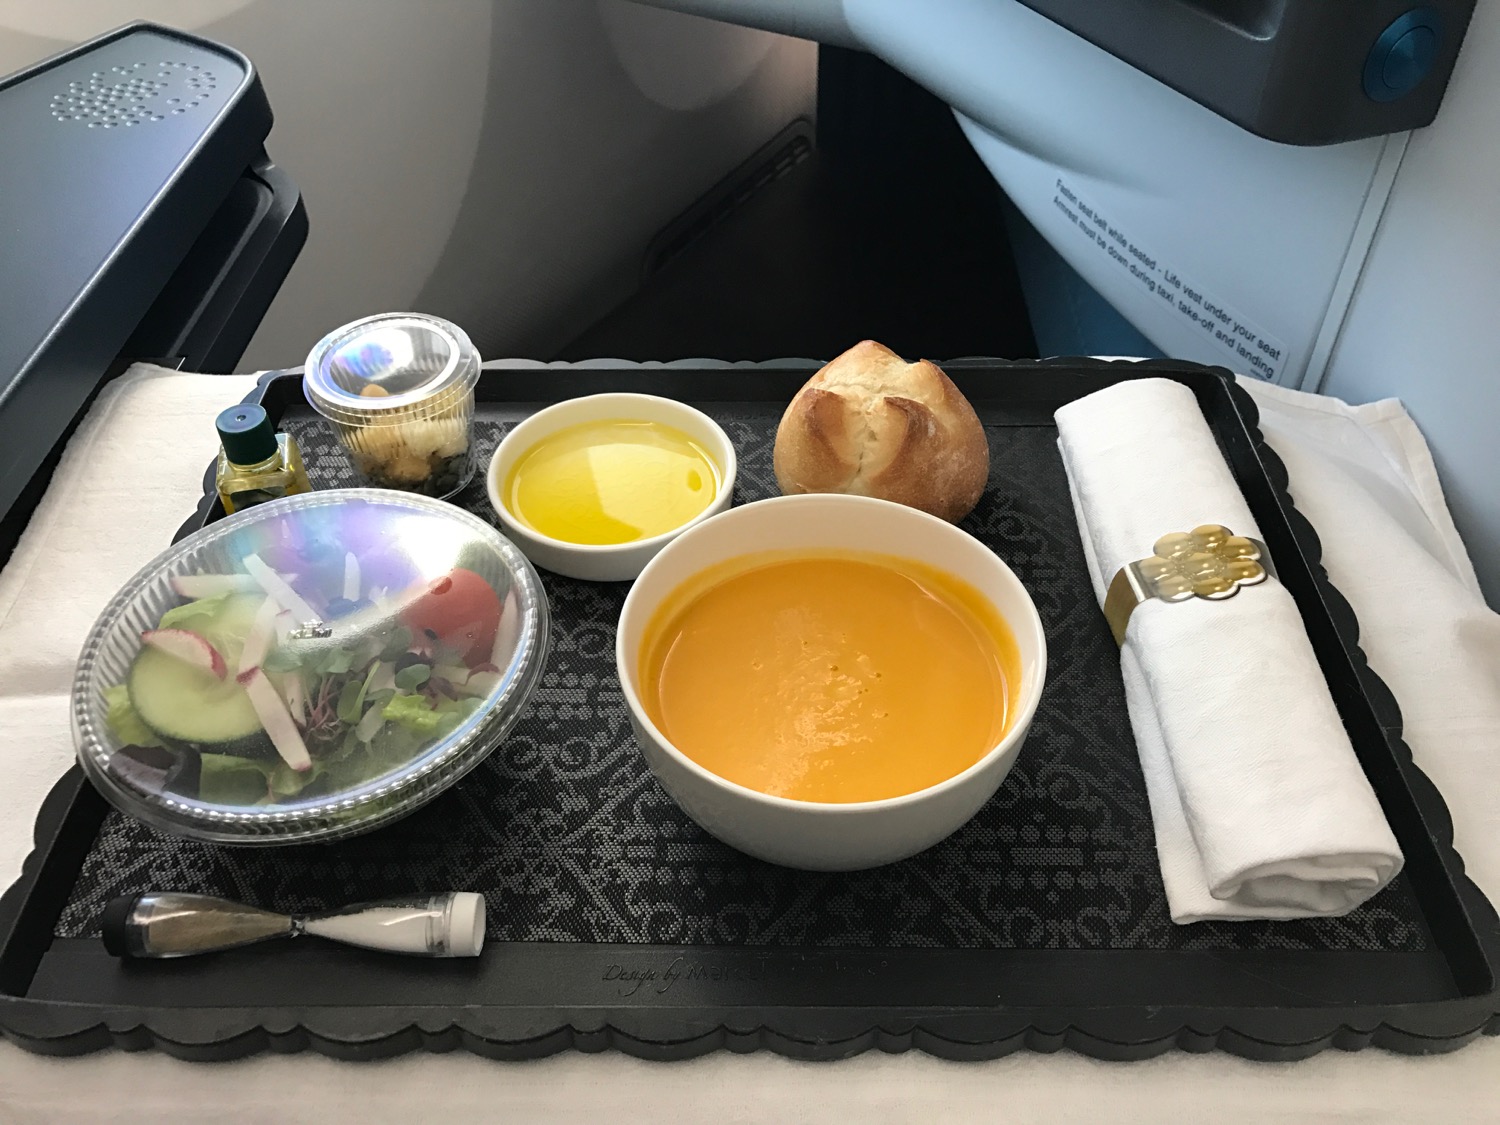 KLM 787 Business Class Review - 70